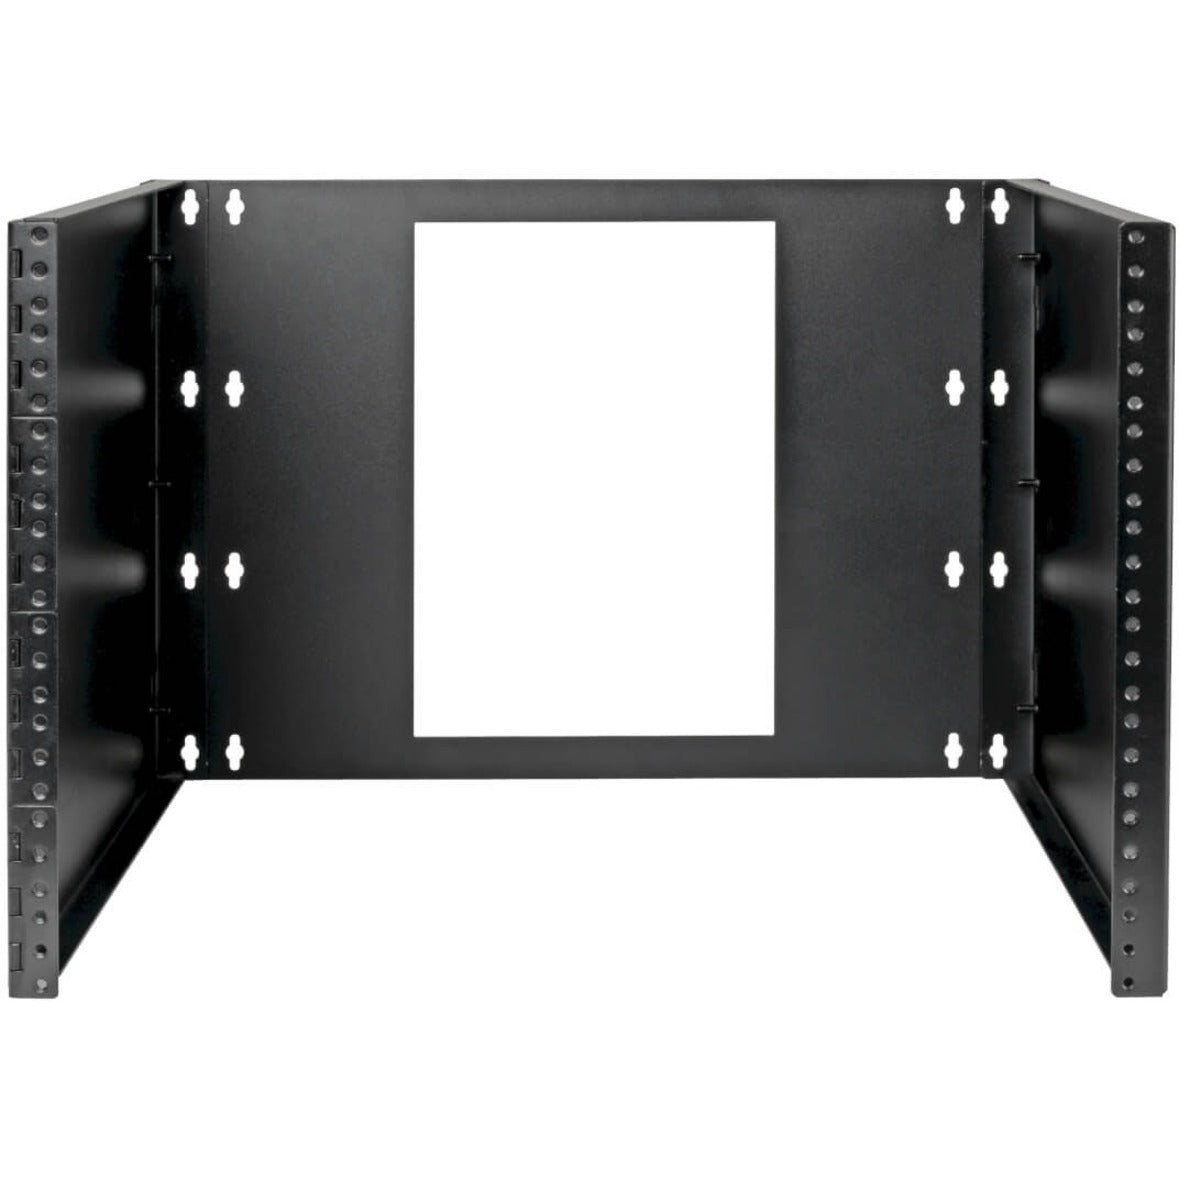 Tripp Lite SRWO8UBRKT 8U Wall-Mount Bracket for Small Switches and Patch Panels, Hinged